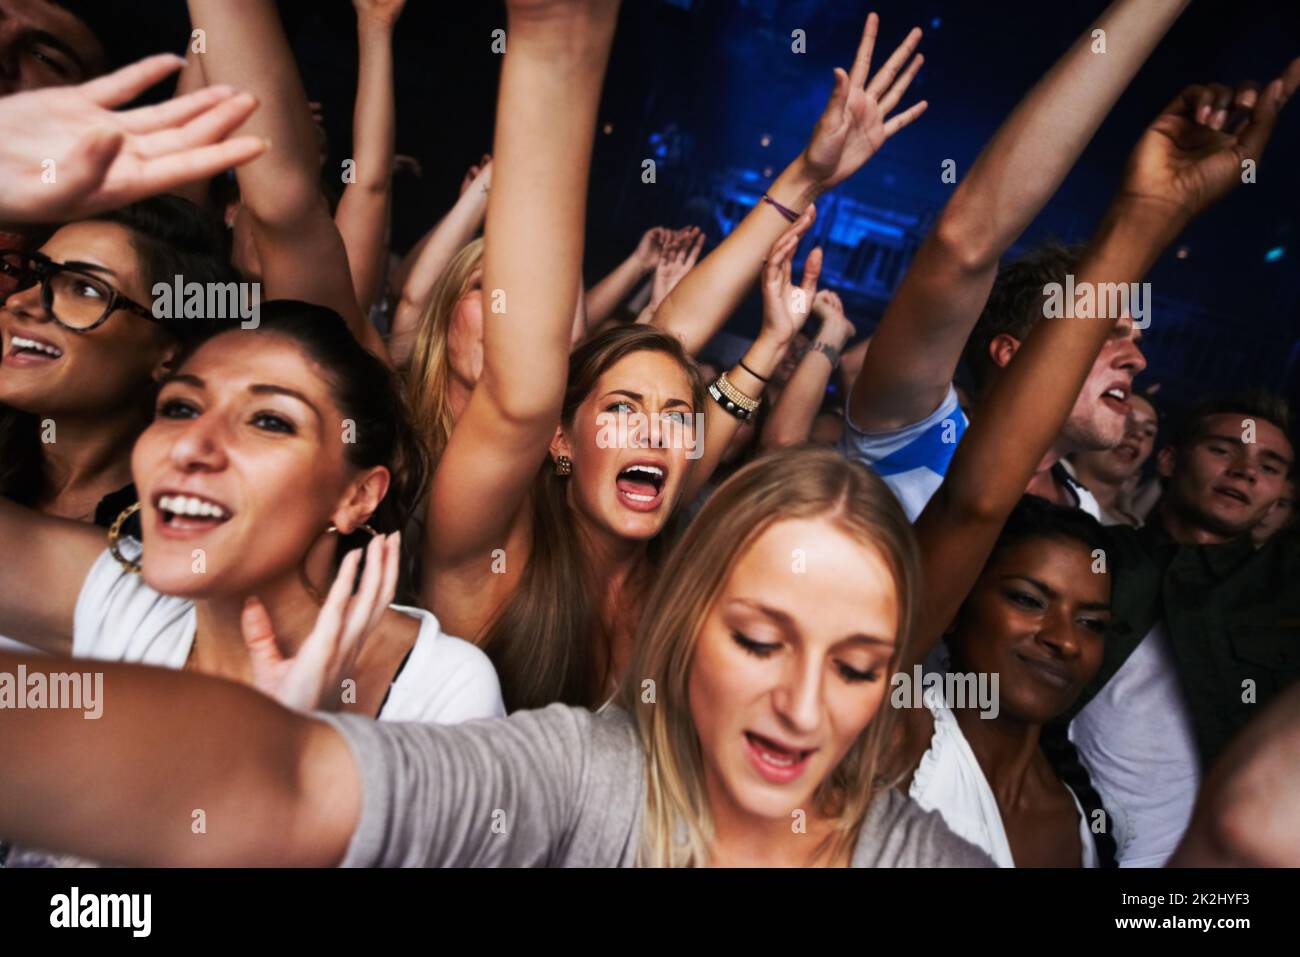 Golden circle. Attractive female fans enjoying a concert- This concert was created for the sole purpose of this photo shoot, featuring 300 models and 3 live bands. All people in this shoot are model released. Stock Photo